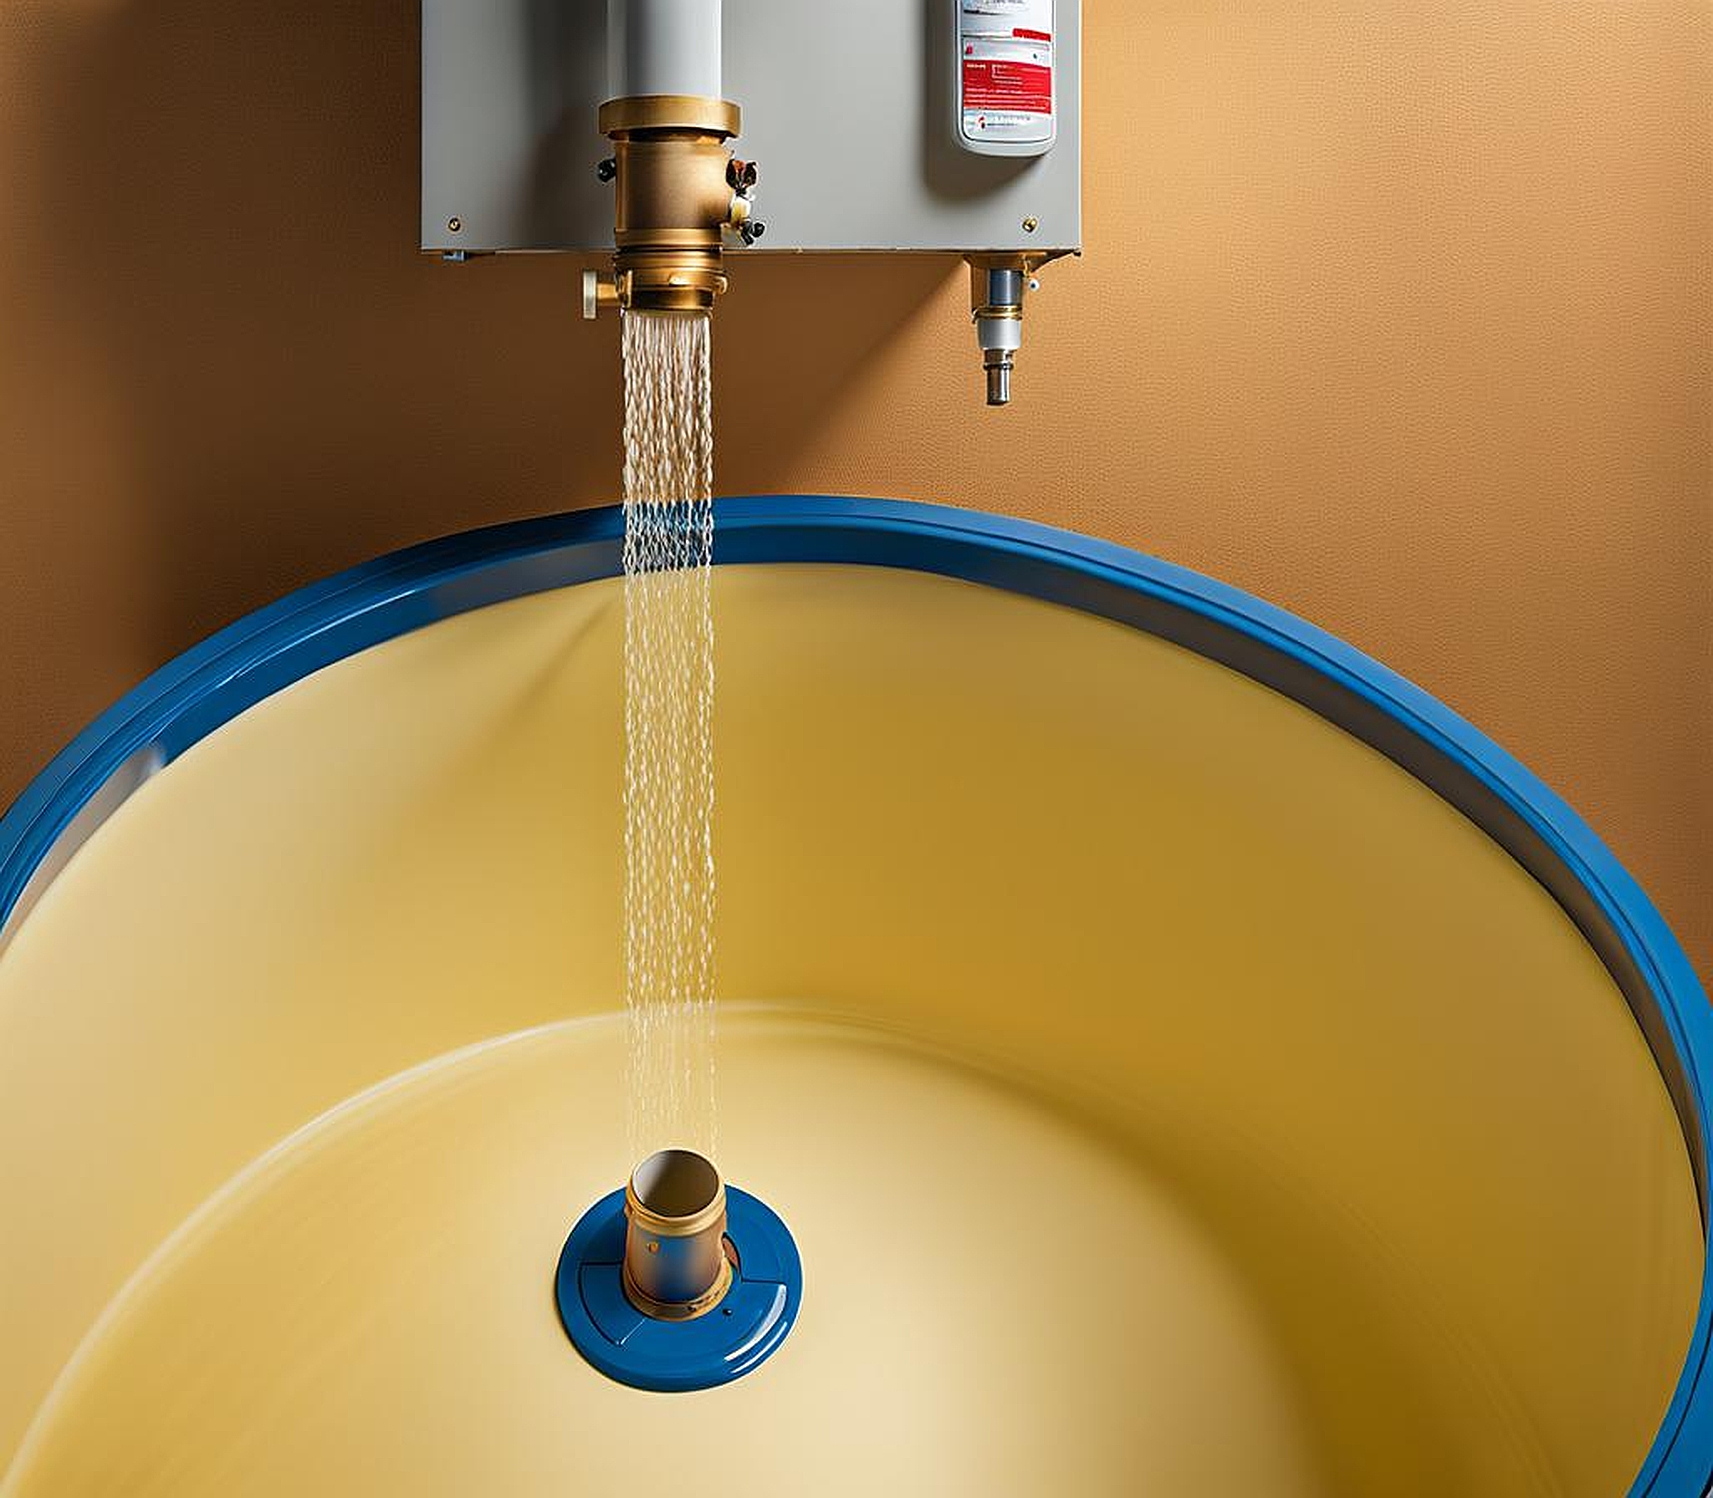 Simple and Effective Temporary Repair for Leaking Hot Water Heater